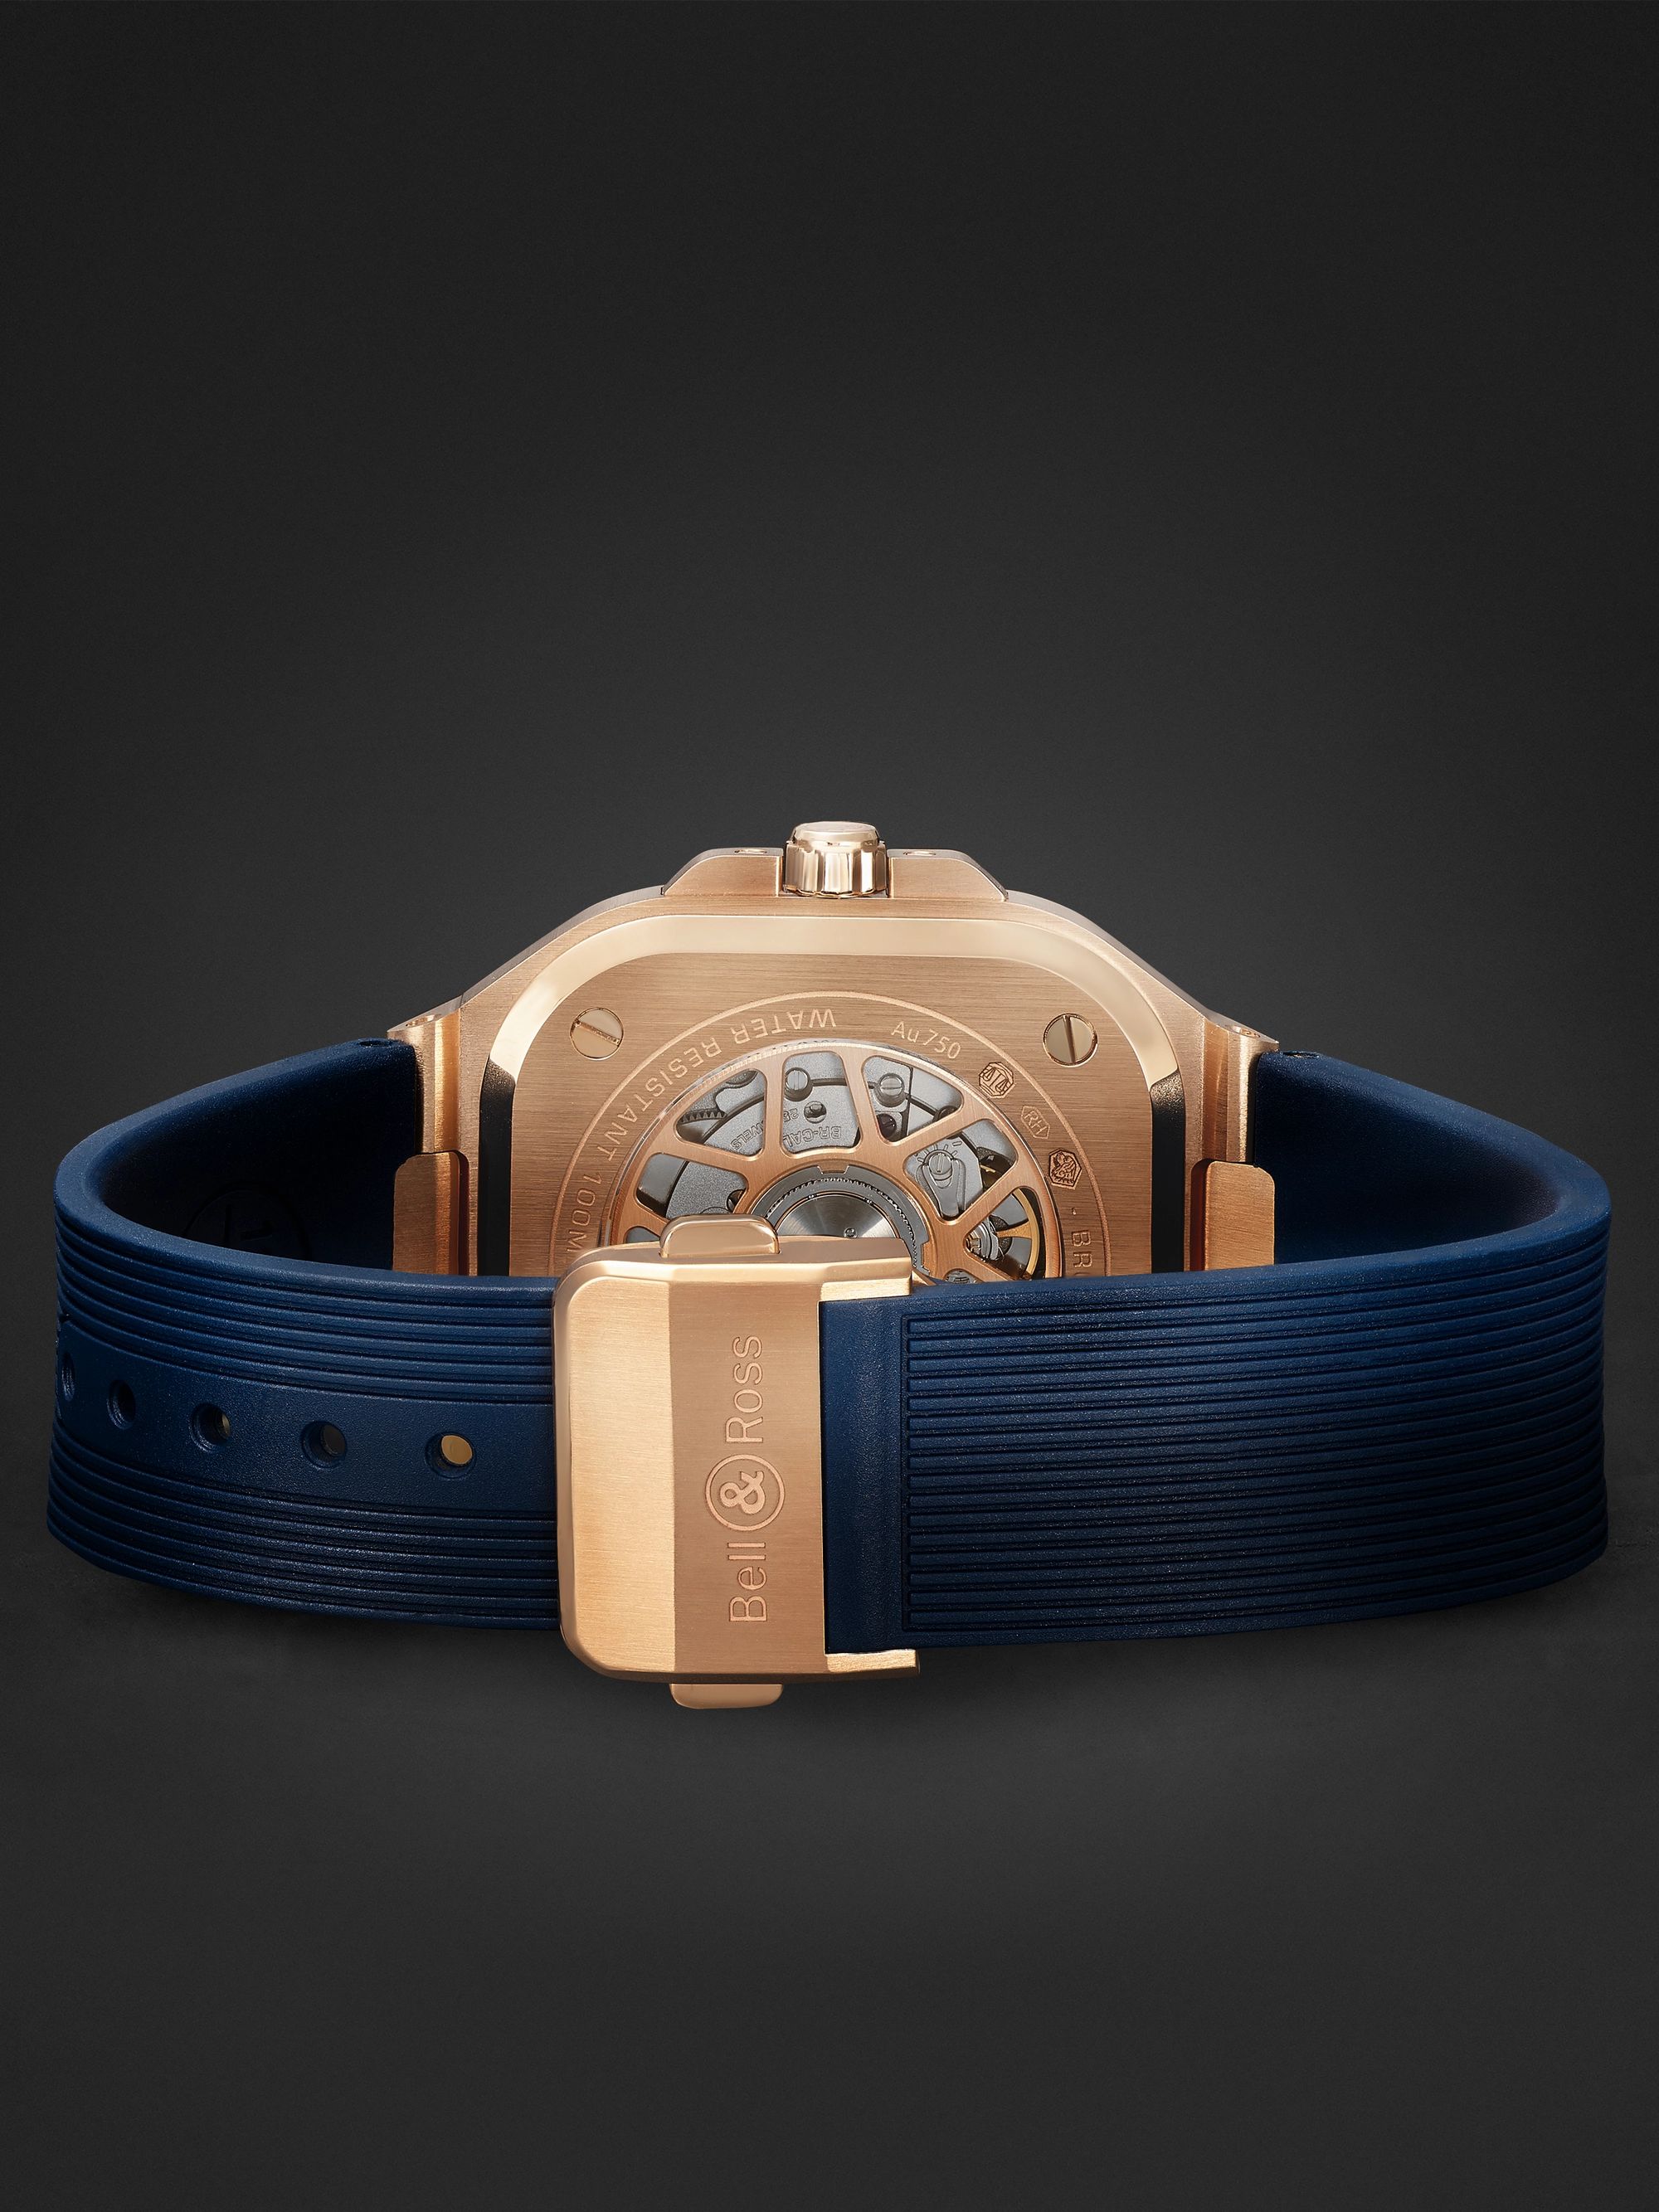 BELL & ROSS BR 05 Blue Gold Automatic 40mm 18-Karat Rose Gold and Rubber Watch, Ref. No. BR05A-BLU-PG/SRB